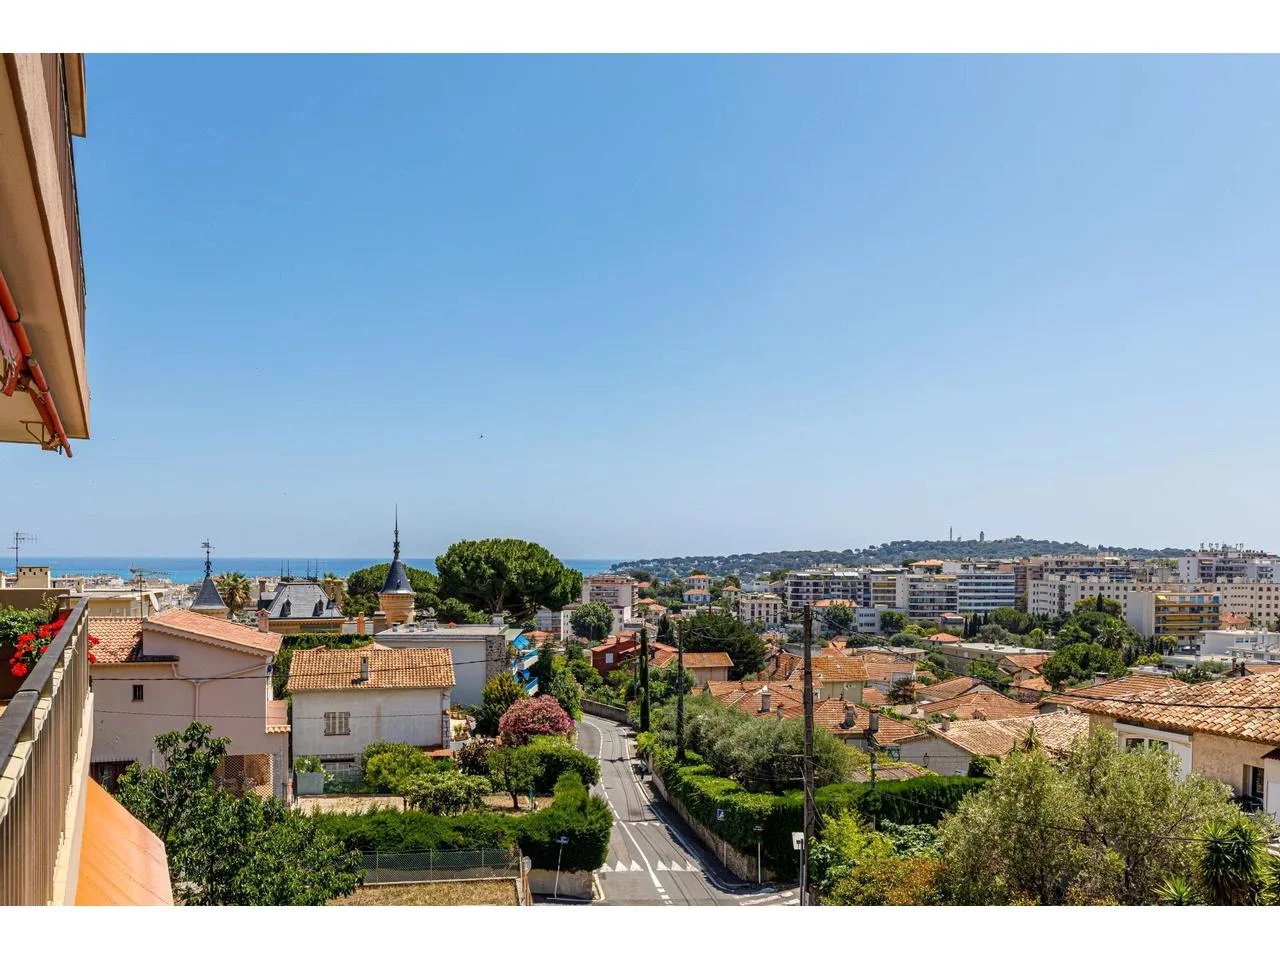 Appartement  2 Rooms 68m2  for sale   405 000 €